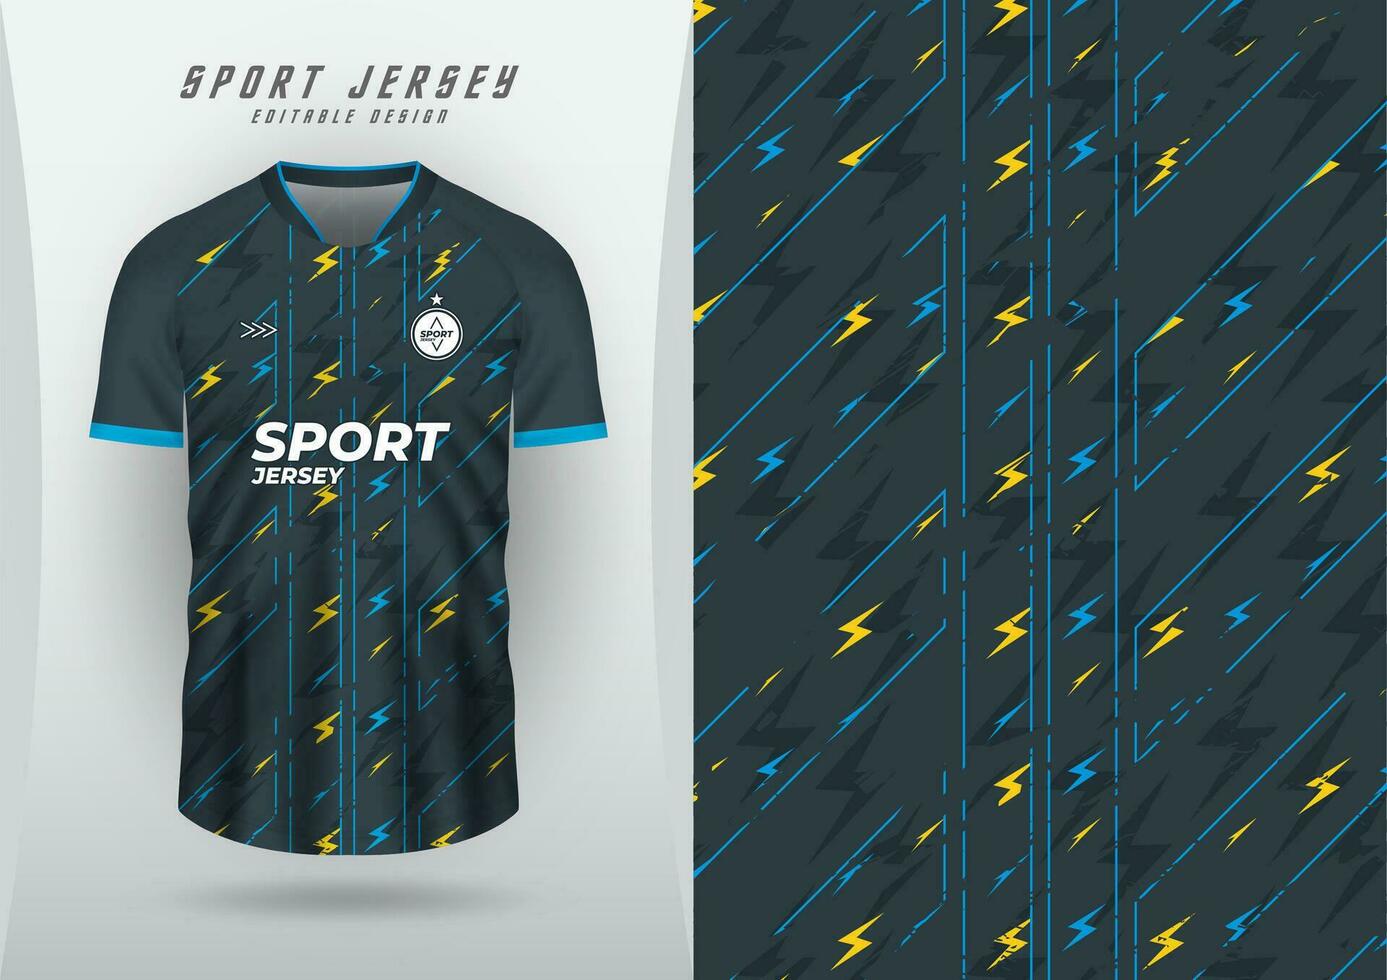 Background for sports jersey, soccer jersey, running jersey, racing jersey, pattern, thunder yellow and blue, dark gray tones. vector